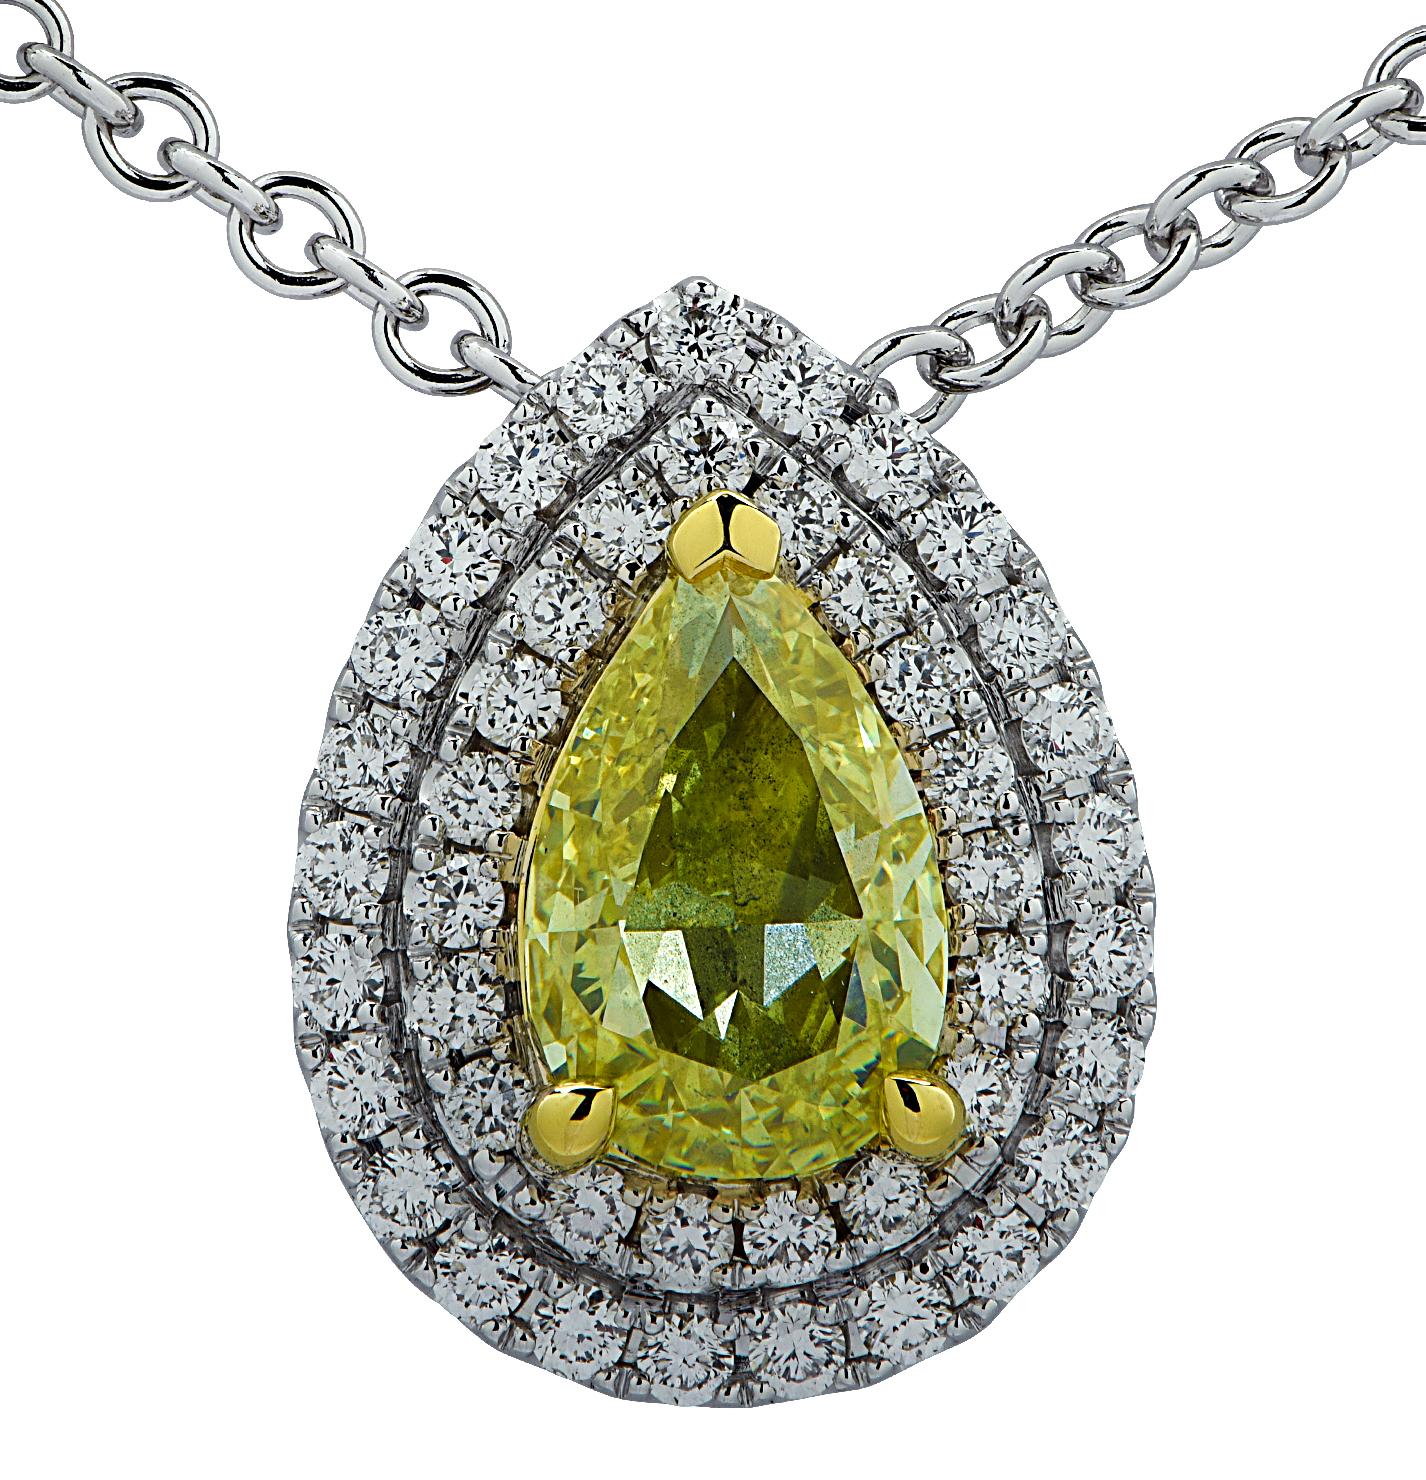 Stunning Vivid Diamonds necklace crafted in 18 karat gold, showcasing a GIA Certified Fancy Yellow Pear shape diamonds weighing 1.01 carats, and 44 round brilliant cut diamonds weighing 33 carats total, G color, VS-SI clarity. The yellow pear shape